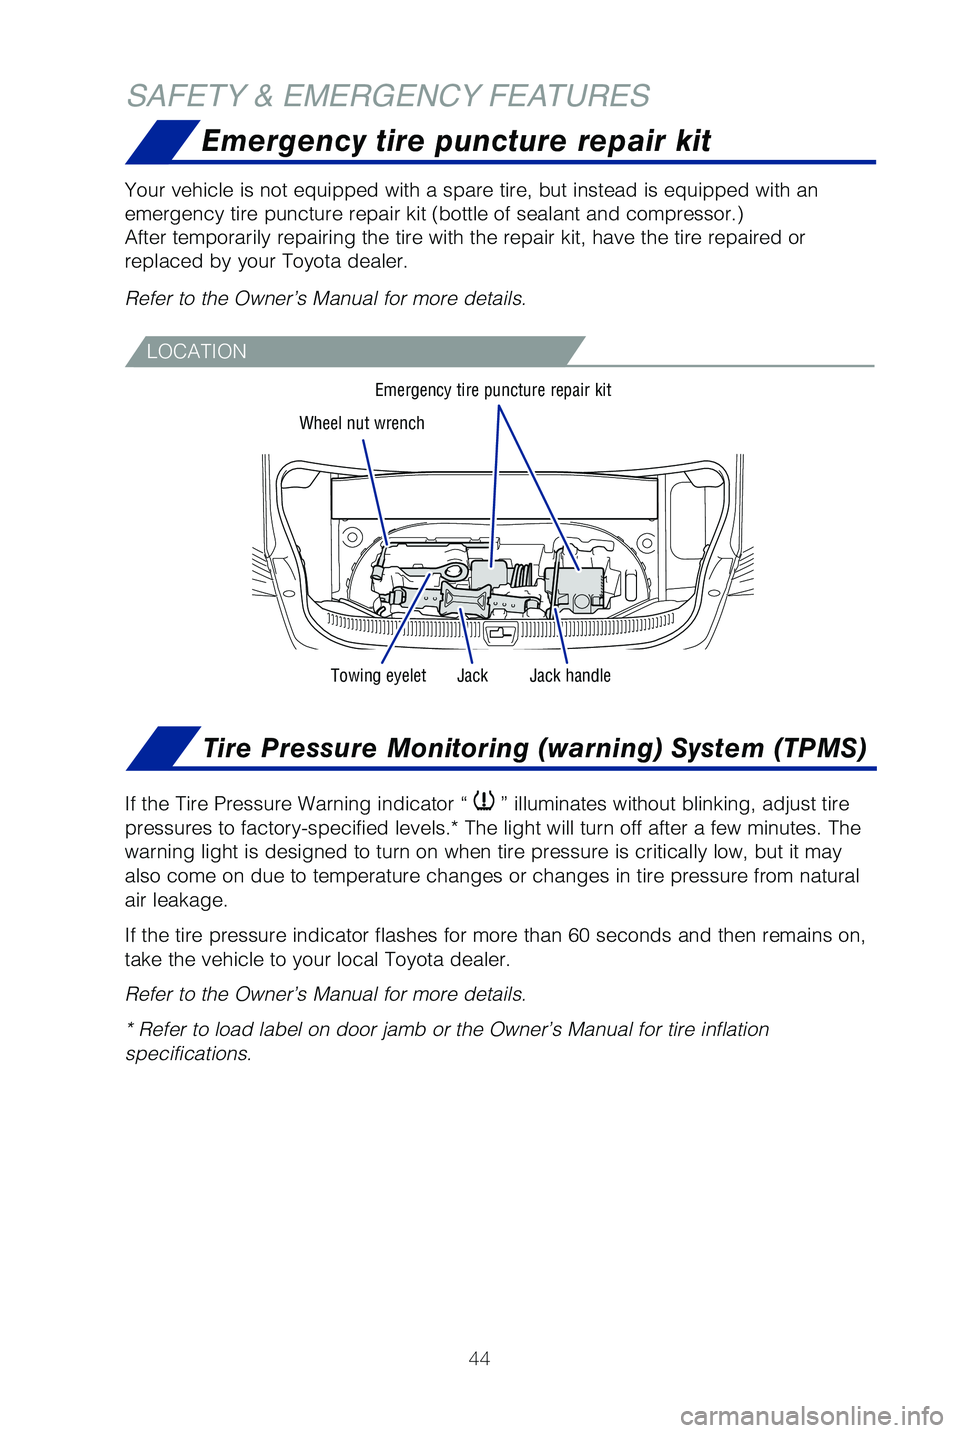 TOYOTA MIRAI 2019  Owners Manual (in English) 44
Emergency tire puncture repair kit
SAFETY & EMERGENCY FEATURES
�:�P�V�S �W�F�I�J�D�M�F �J�T �O�P�U �F�R�V�J�Q�Q�F�E �X�J�U�I �B �T�Q�B�S�F �U�J�S�F�
 �C�V�U �J�O�T�U�F�B�E �J�T �F�R�V�J�Q�Q�F�E �X�